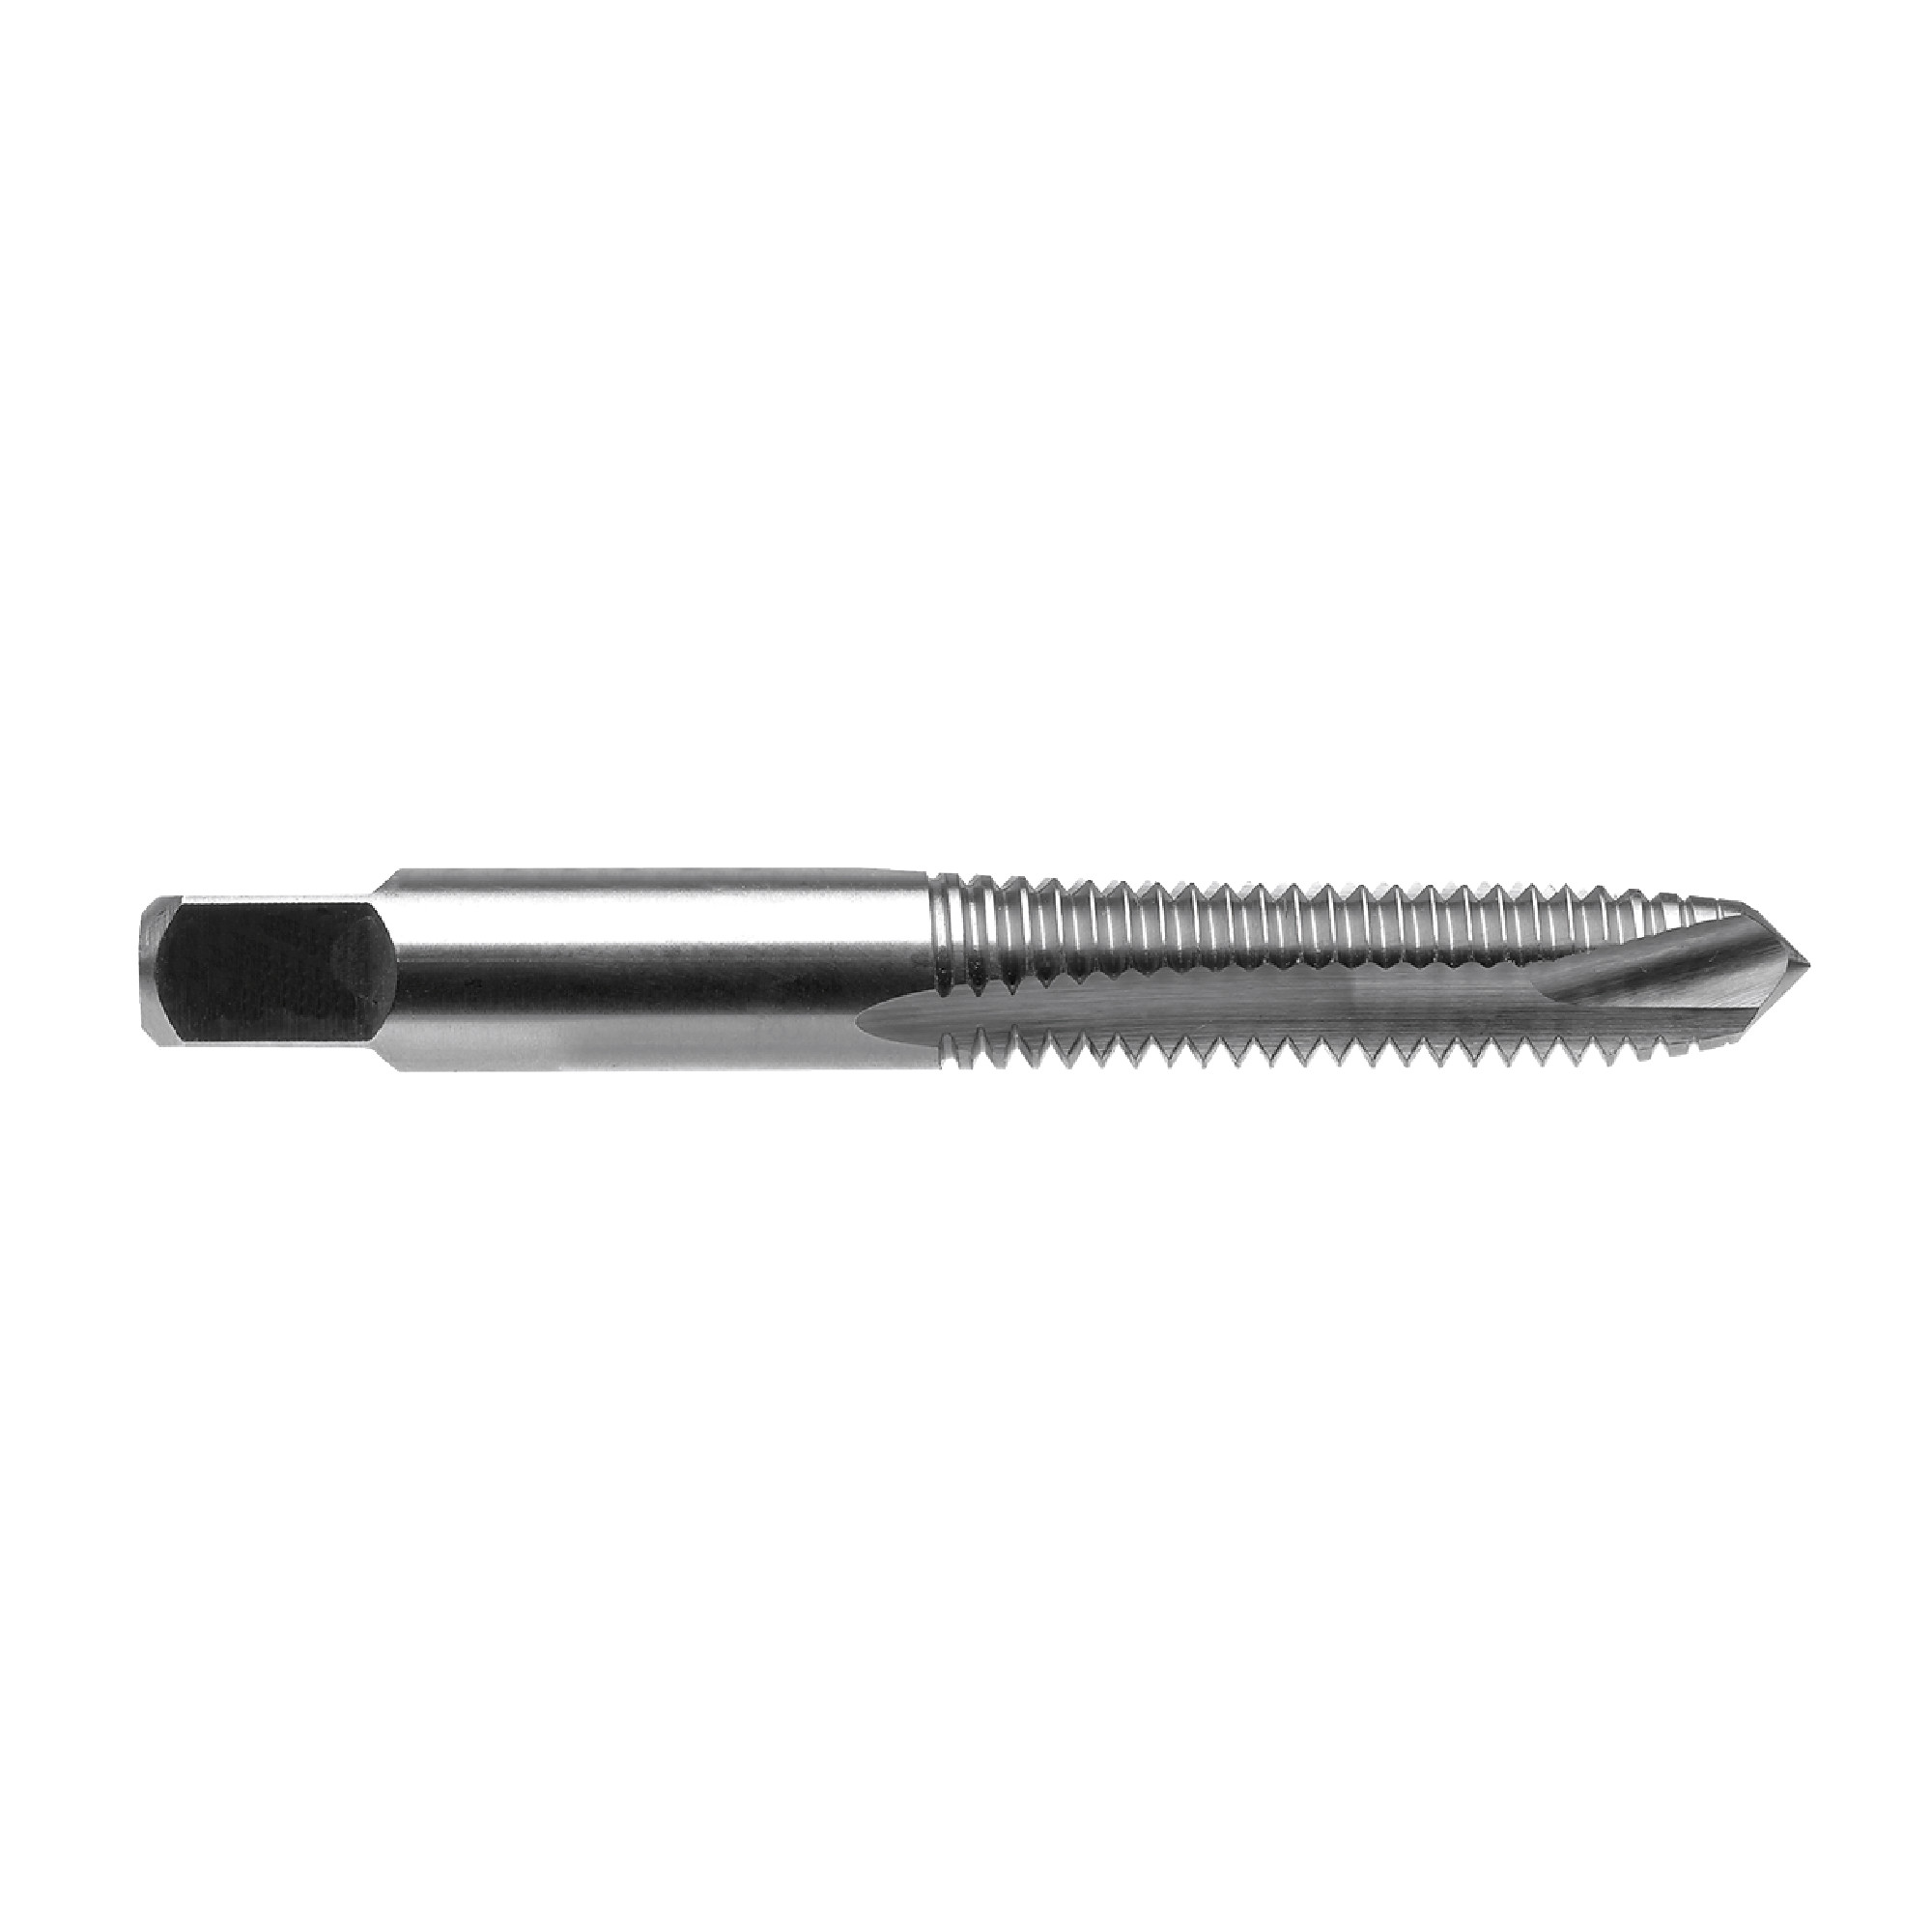 1x14 H4 3F Plug Spiral Pointed Tin Coated Tap